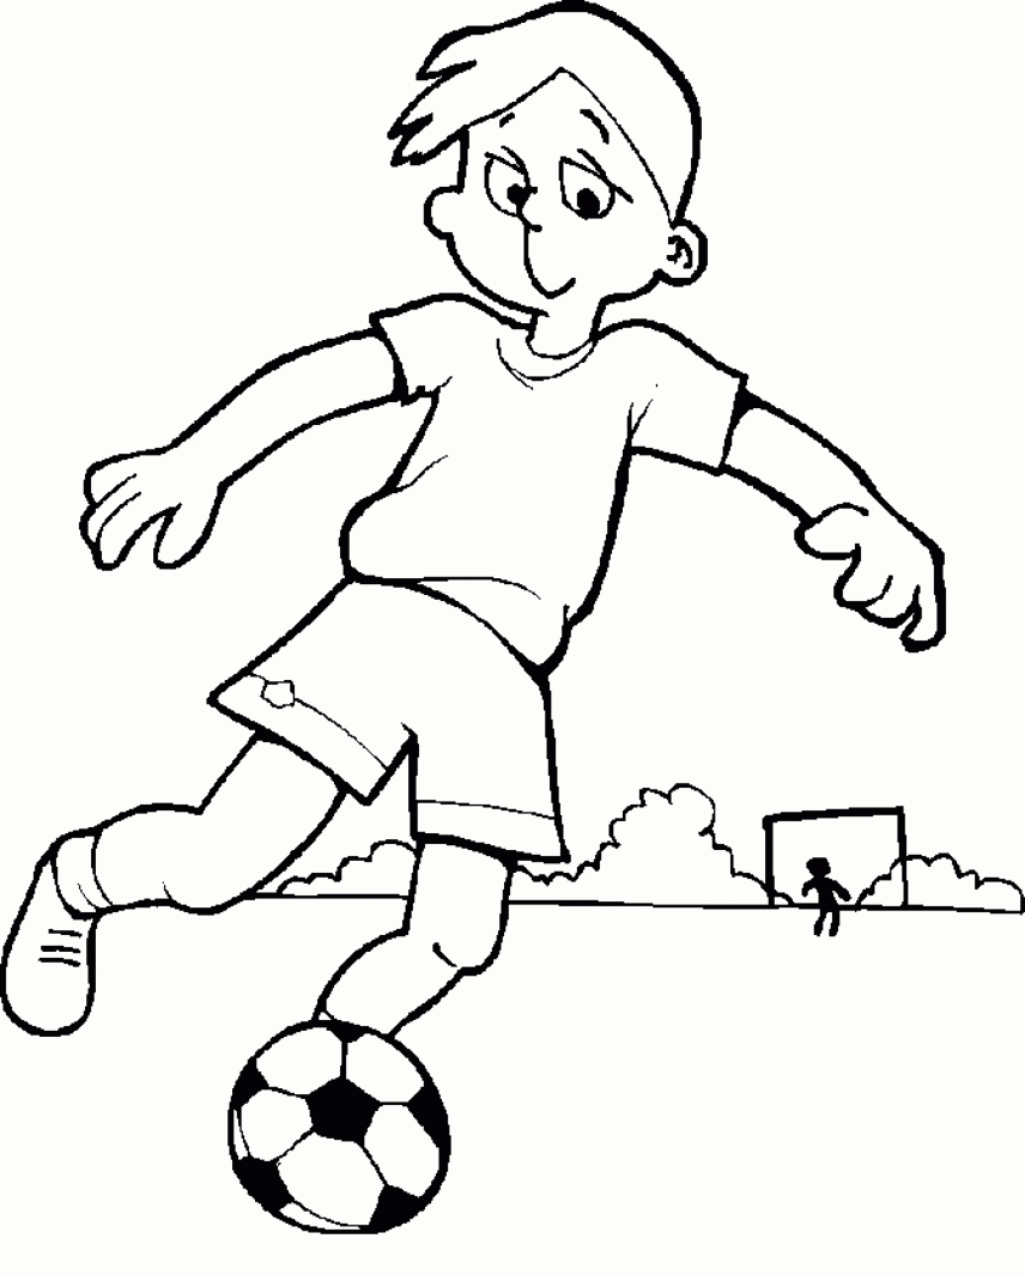 Coloring Pages Of Kids Playing Sports Free Coloring Pages For Boys ...